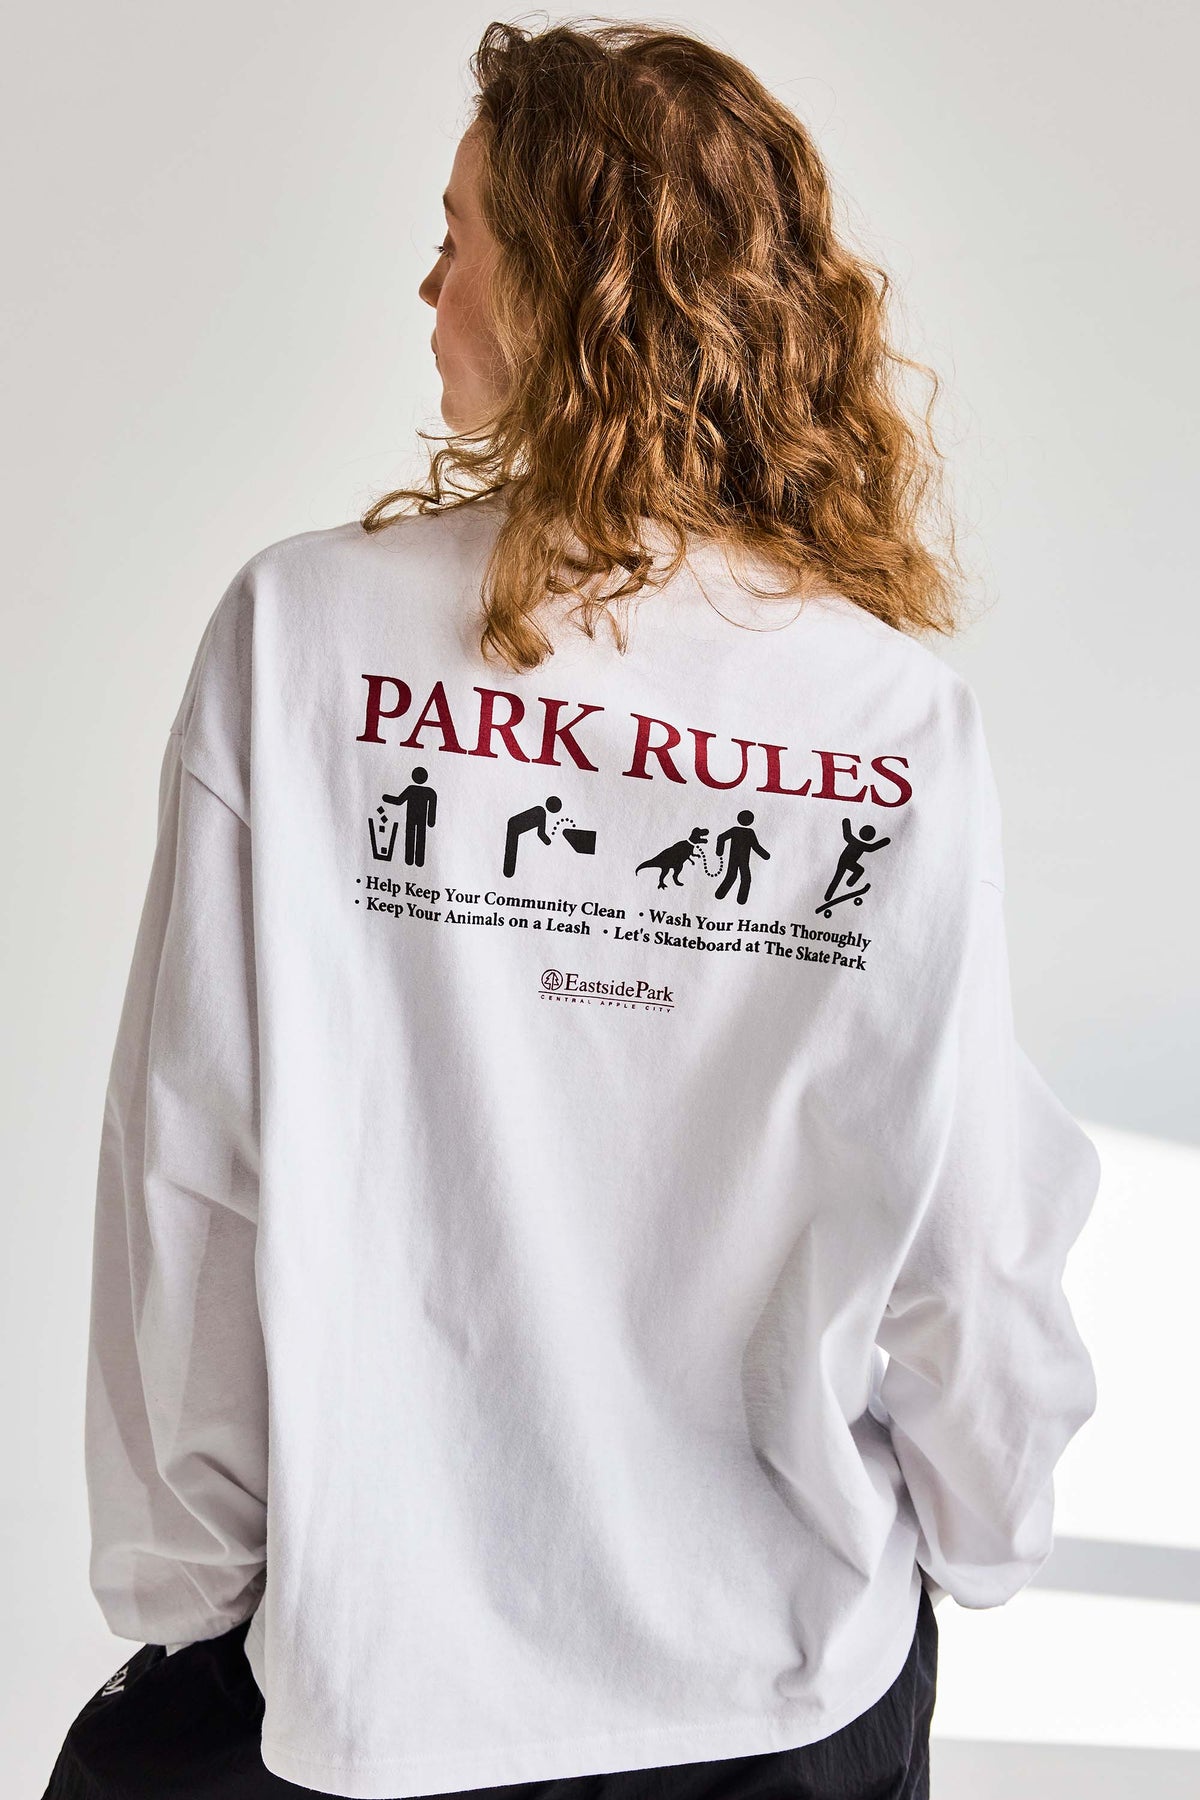 PARK RULES L/S TEE